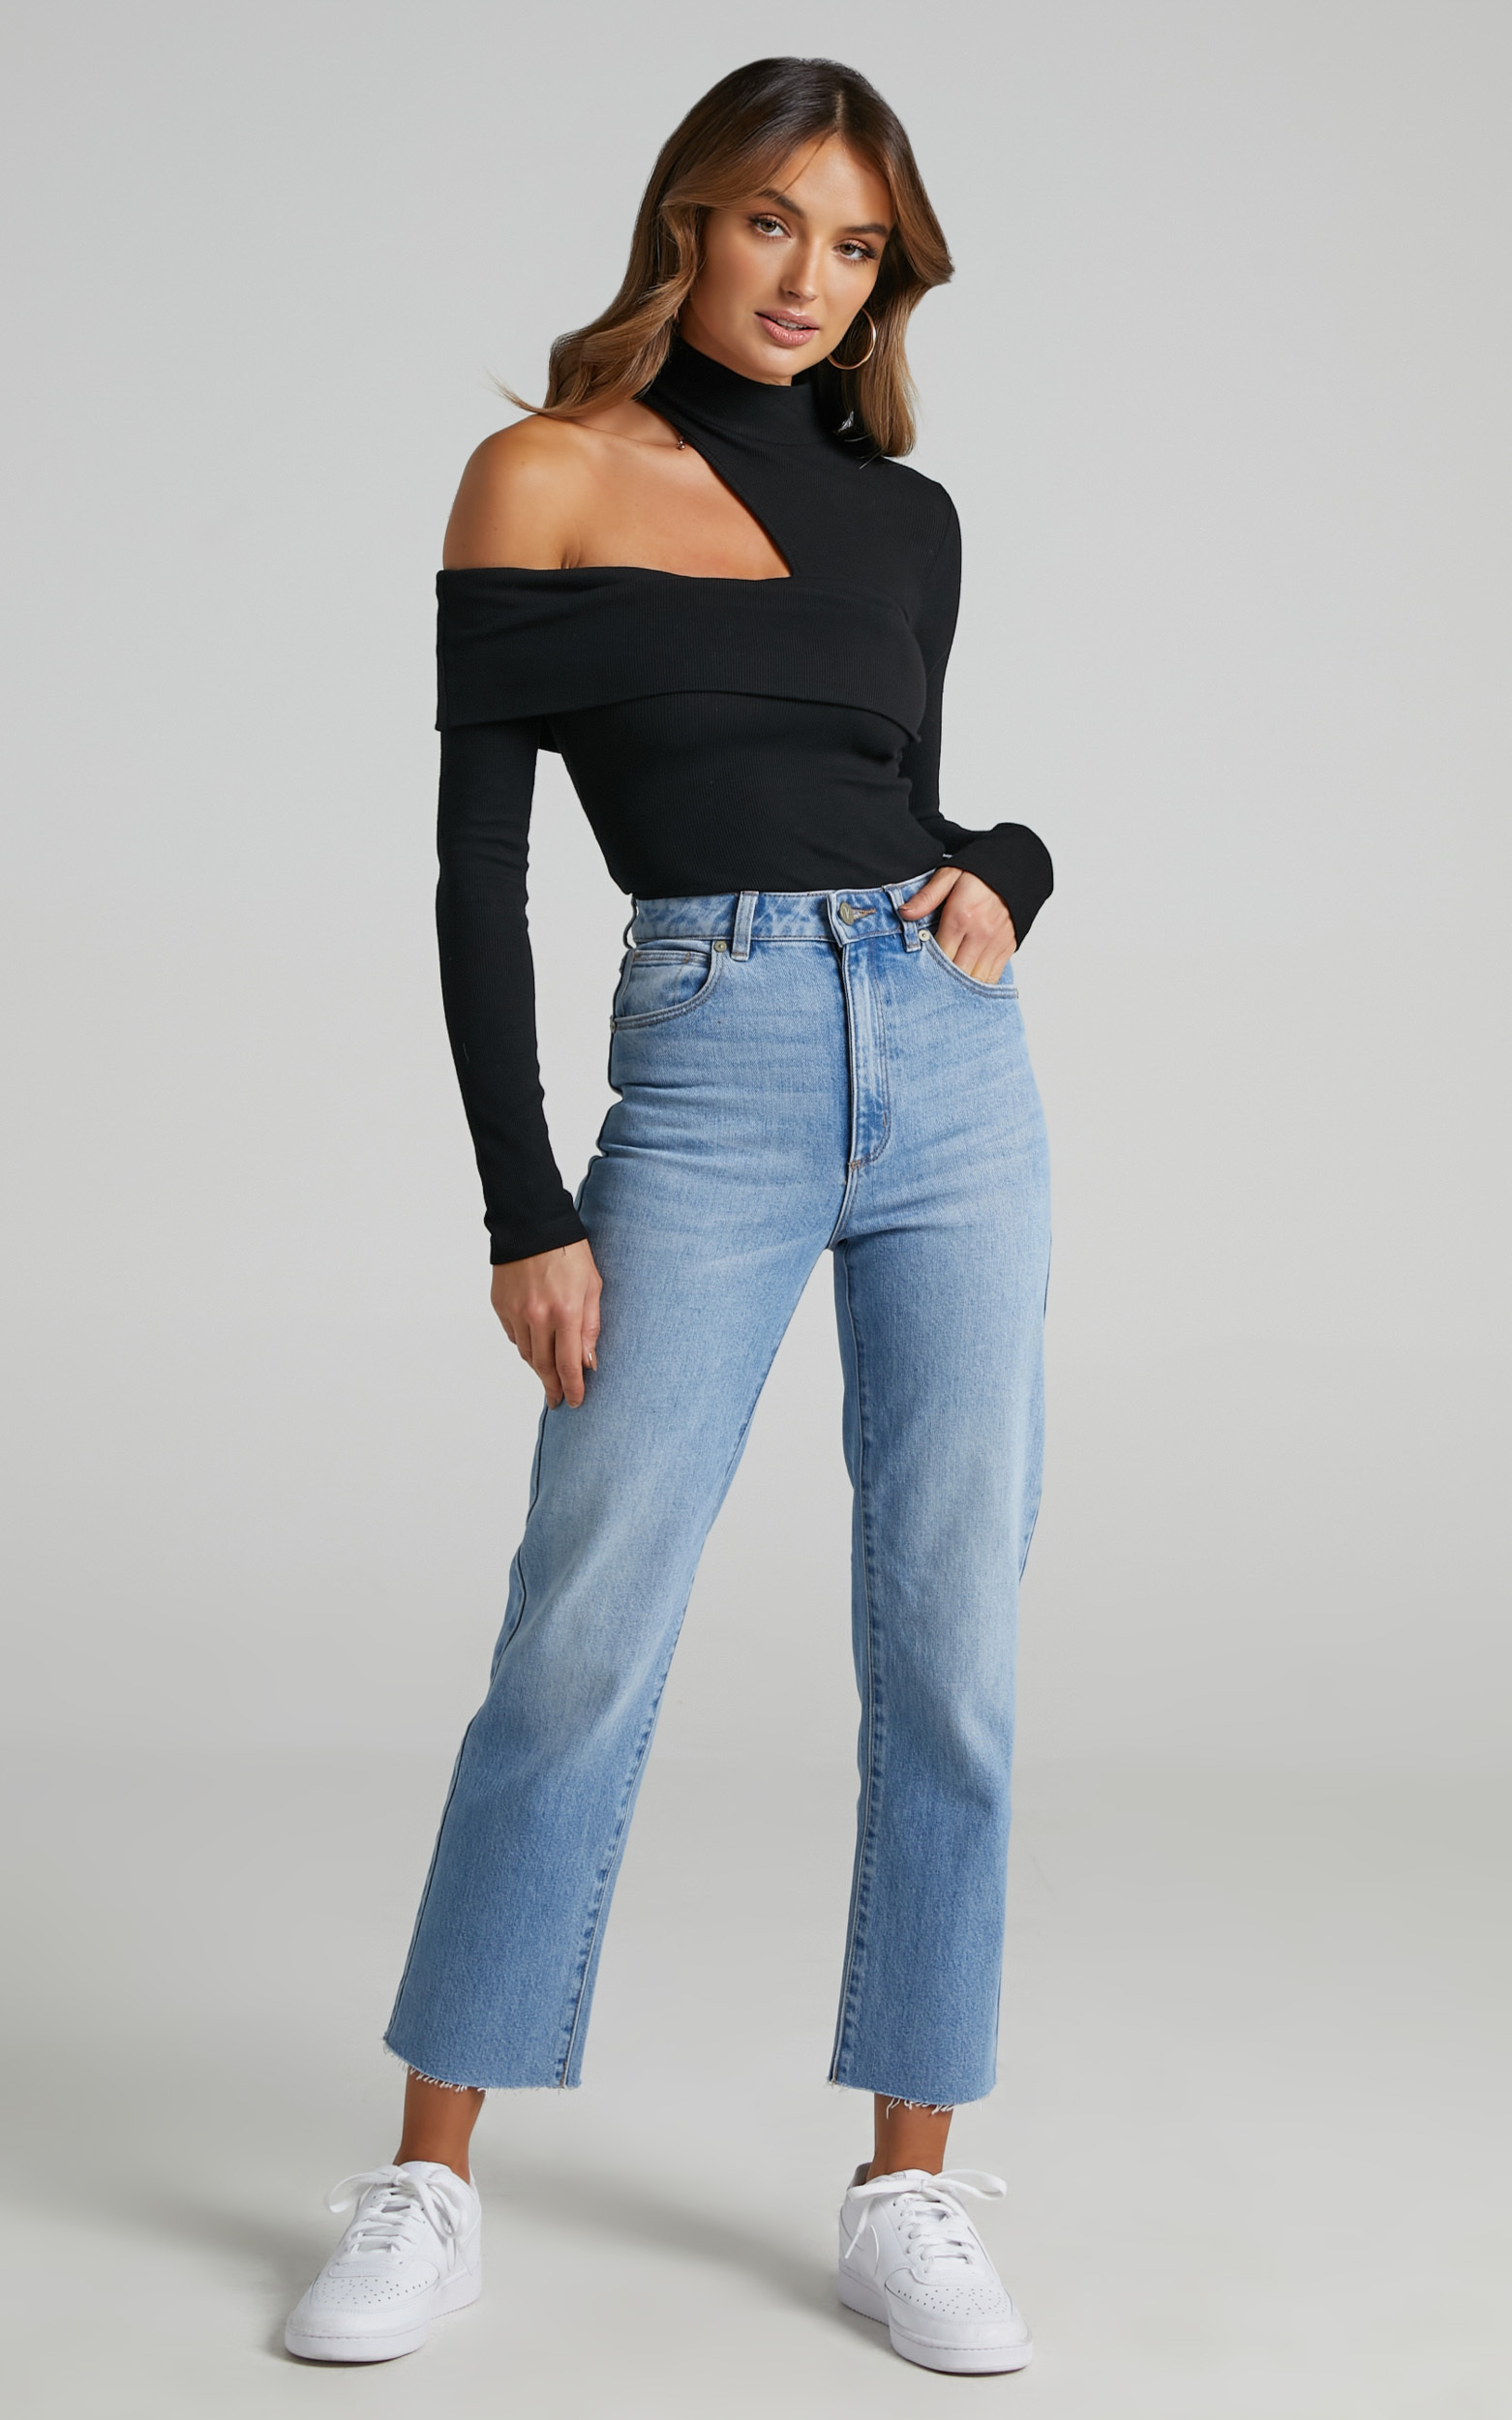 Kiefer Asymmetric Long Sleeve Cutout Top in Black - 06, BLK1, hi-res image number null